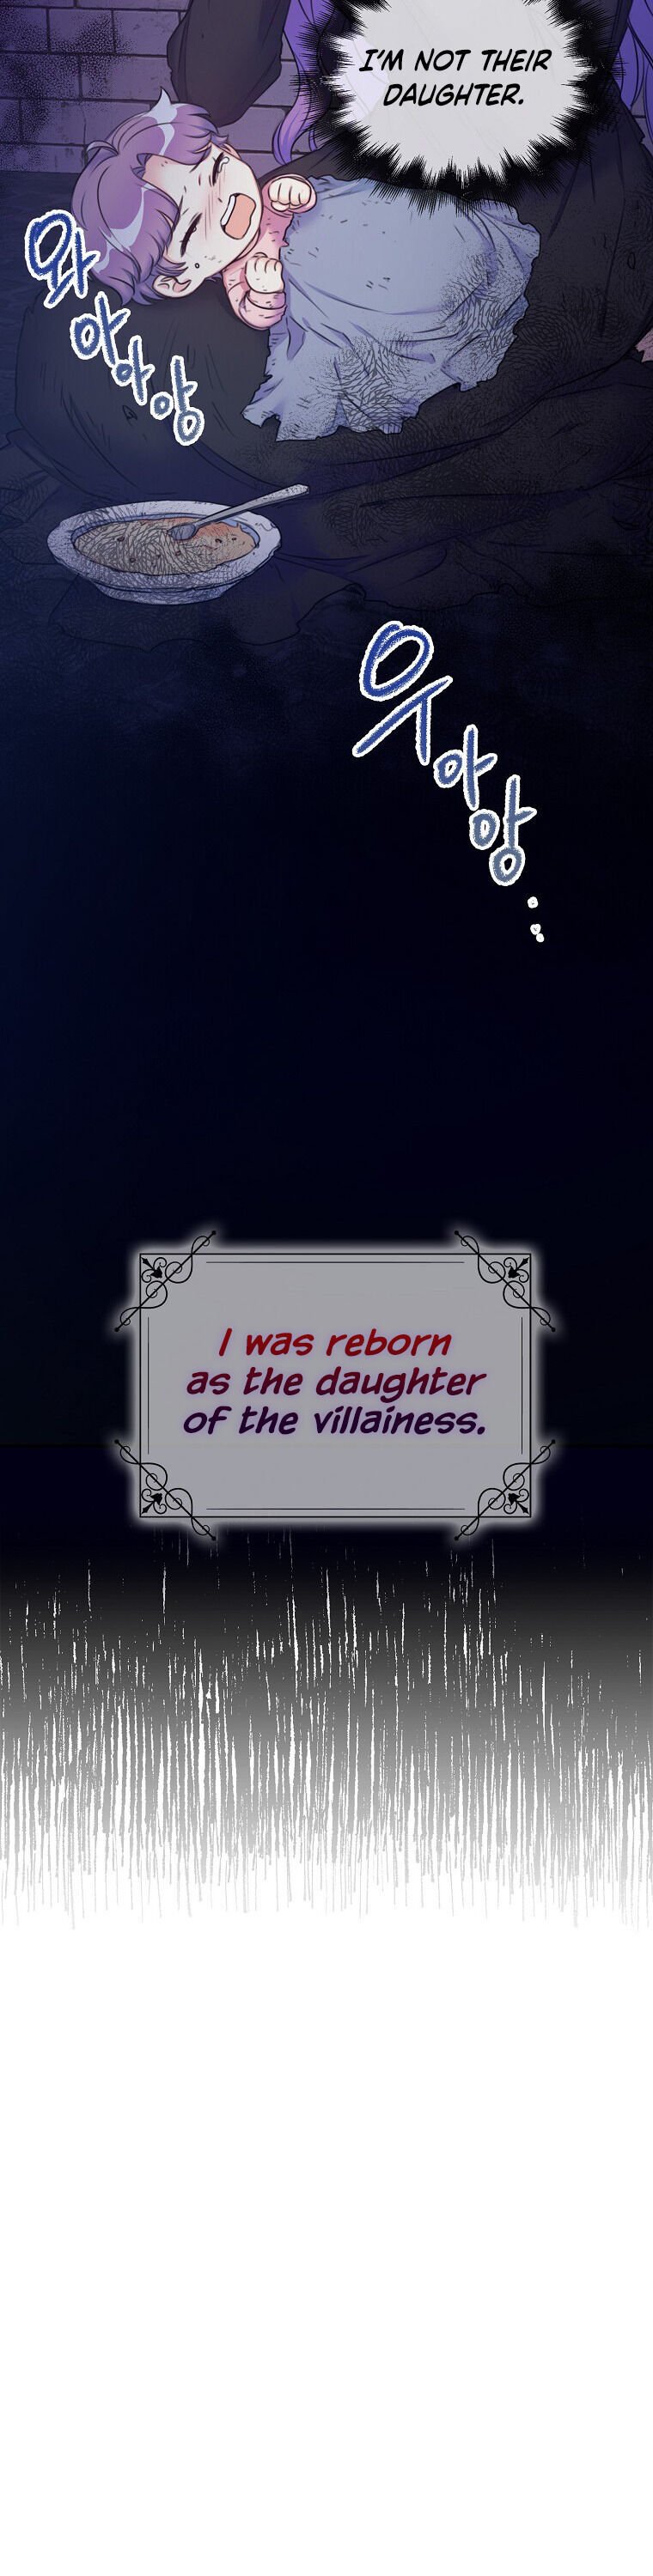 Born as the daughter of the villainess